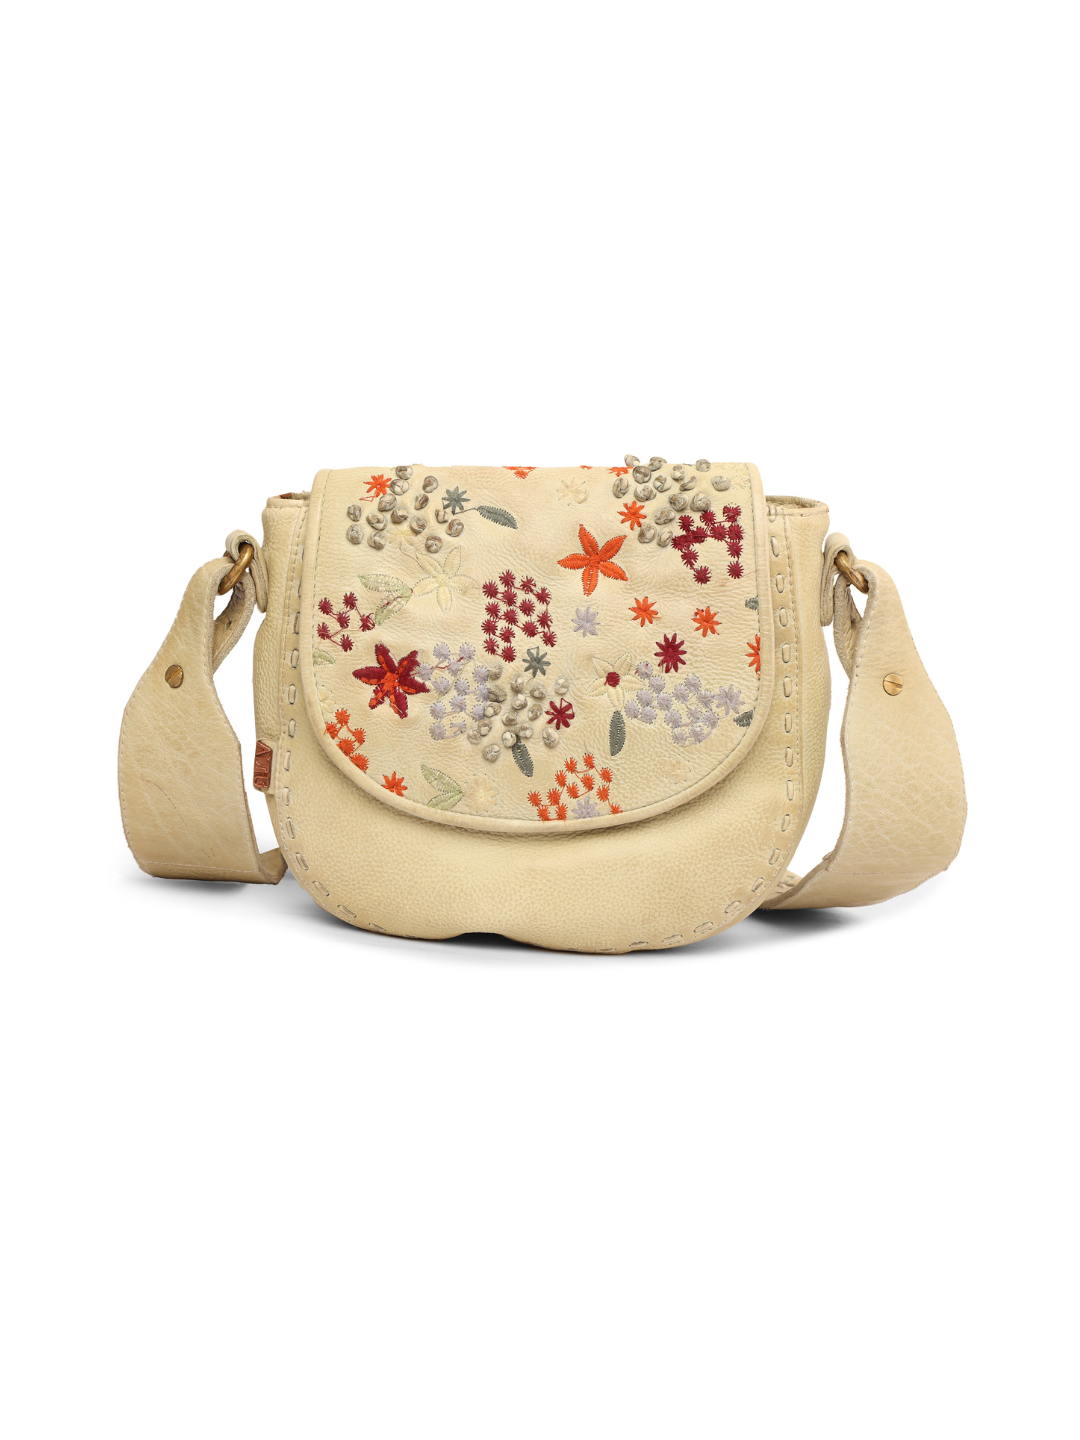 Floral Bliss: L.Green Leather Crossbody bag with Flower Embroidery